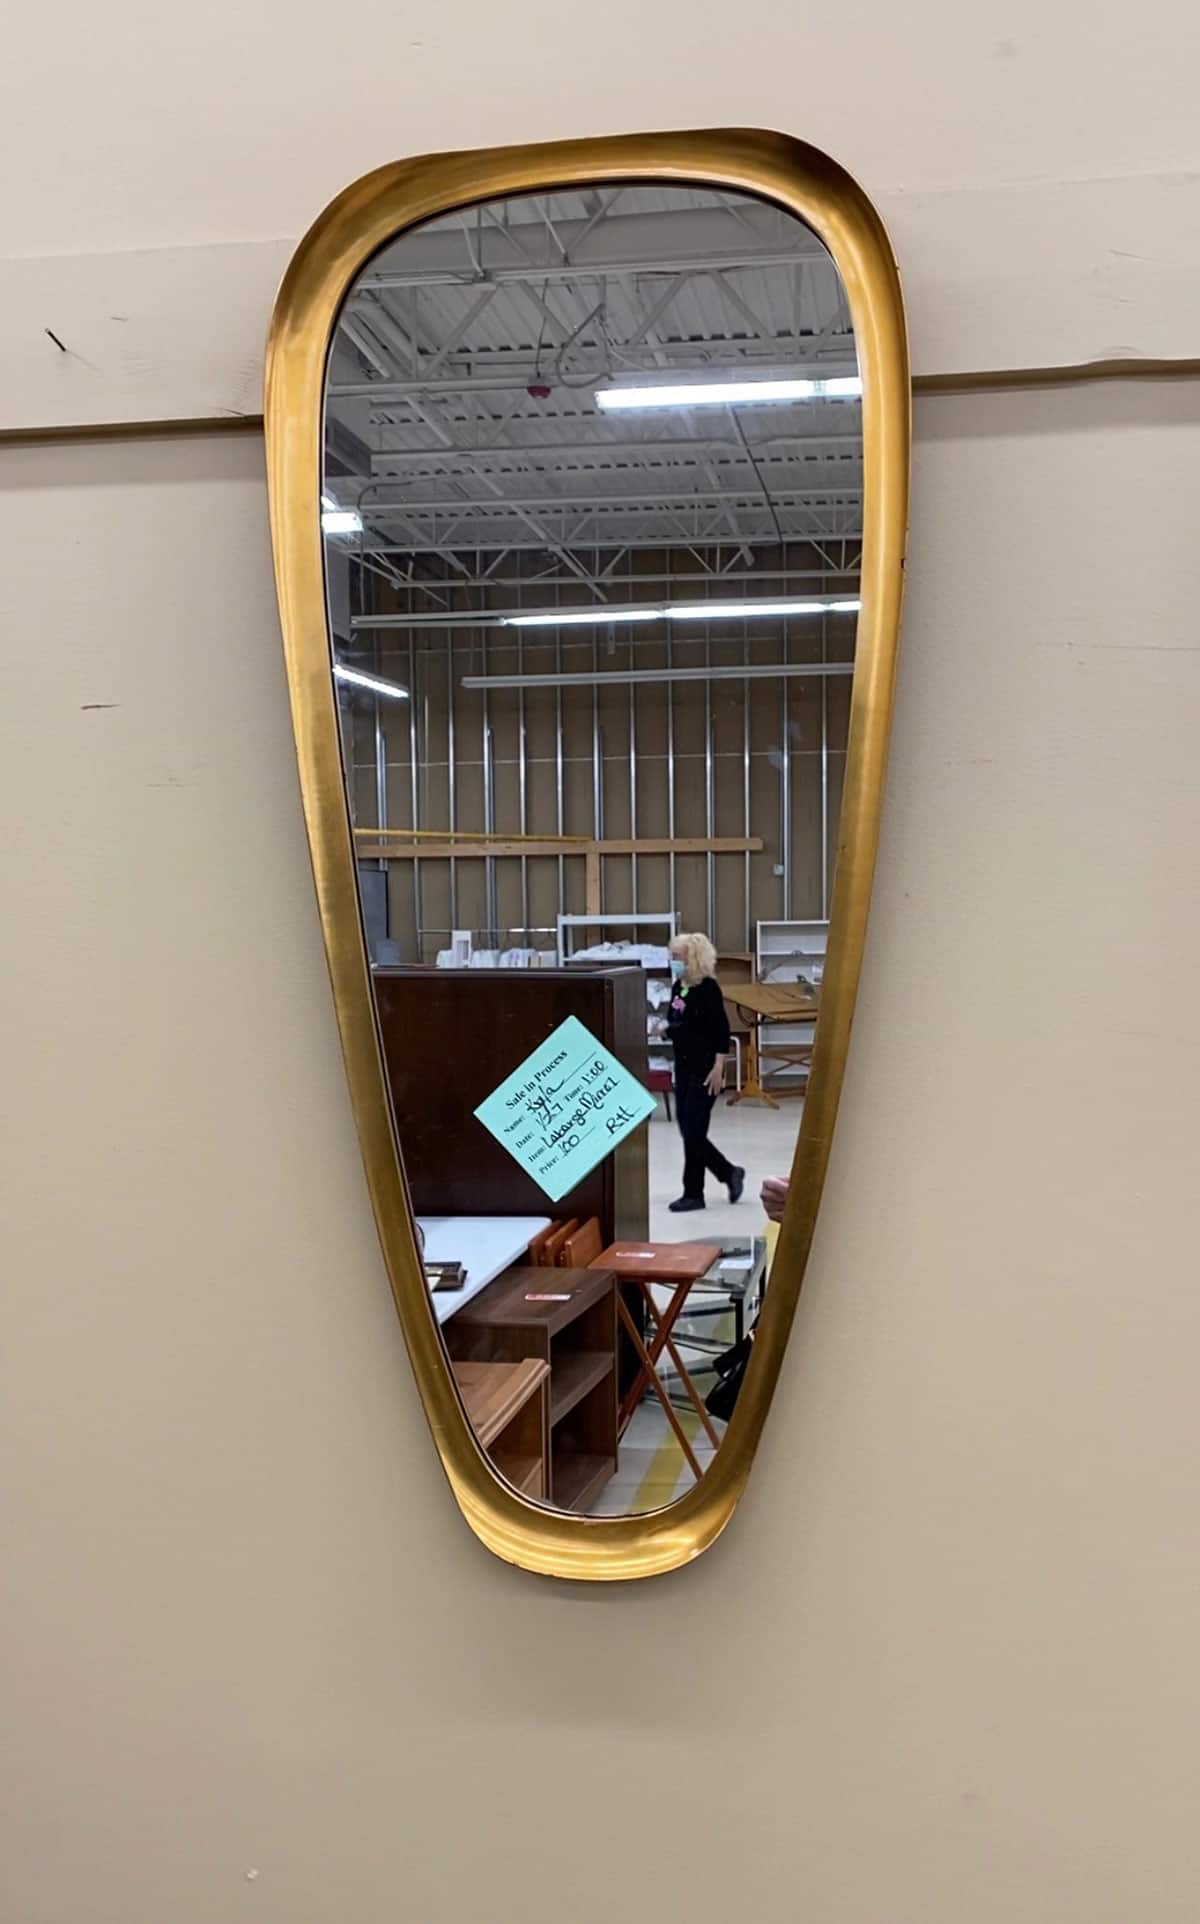 When decorating on a budget, always resell items you no longer need and check the thrift shops before buying new. I found this Vintage Mid-Century Modern LaBarge mirror found at the thrift shop for $100. 